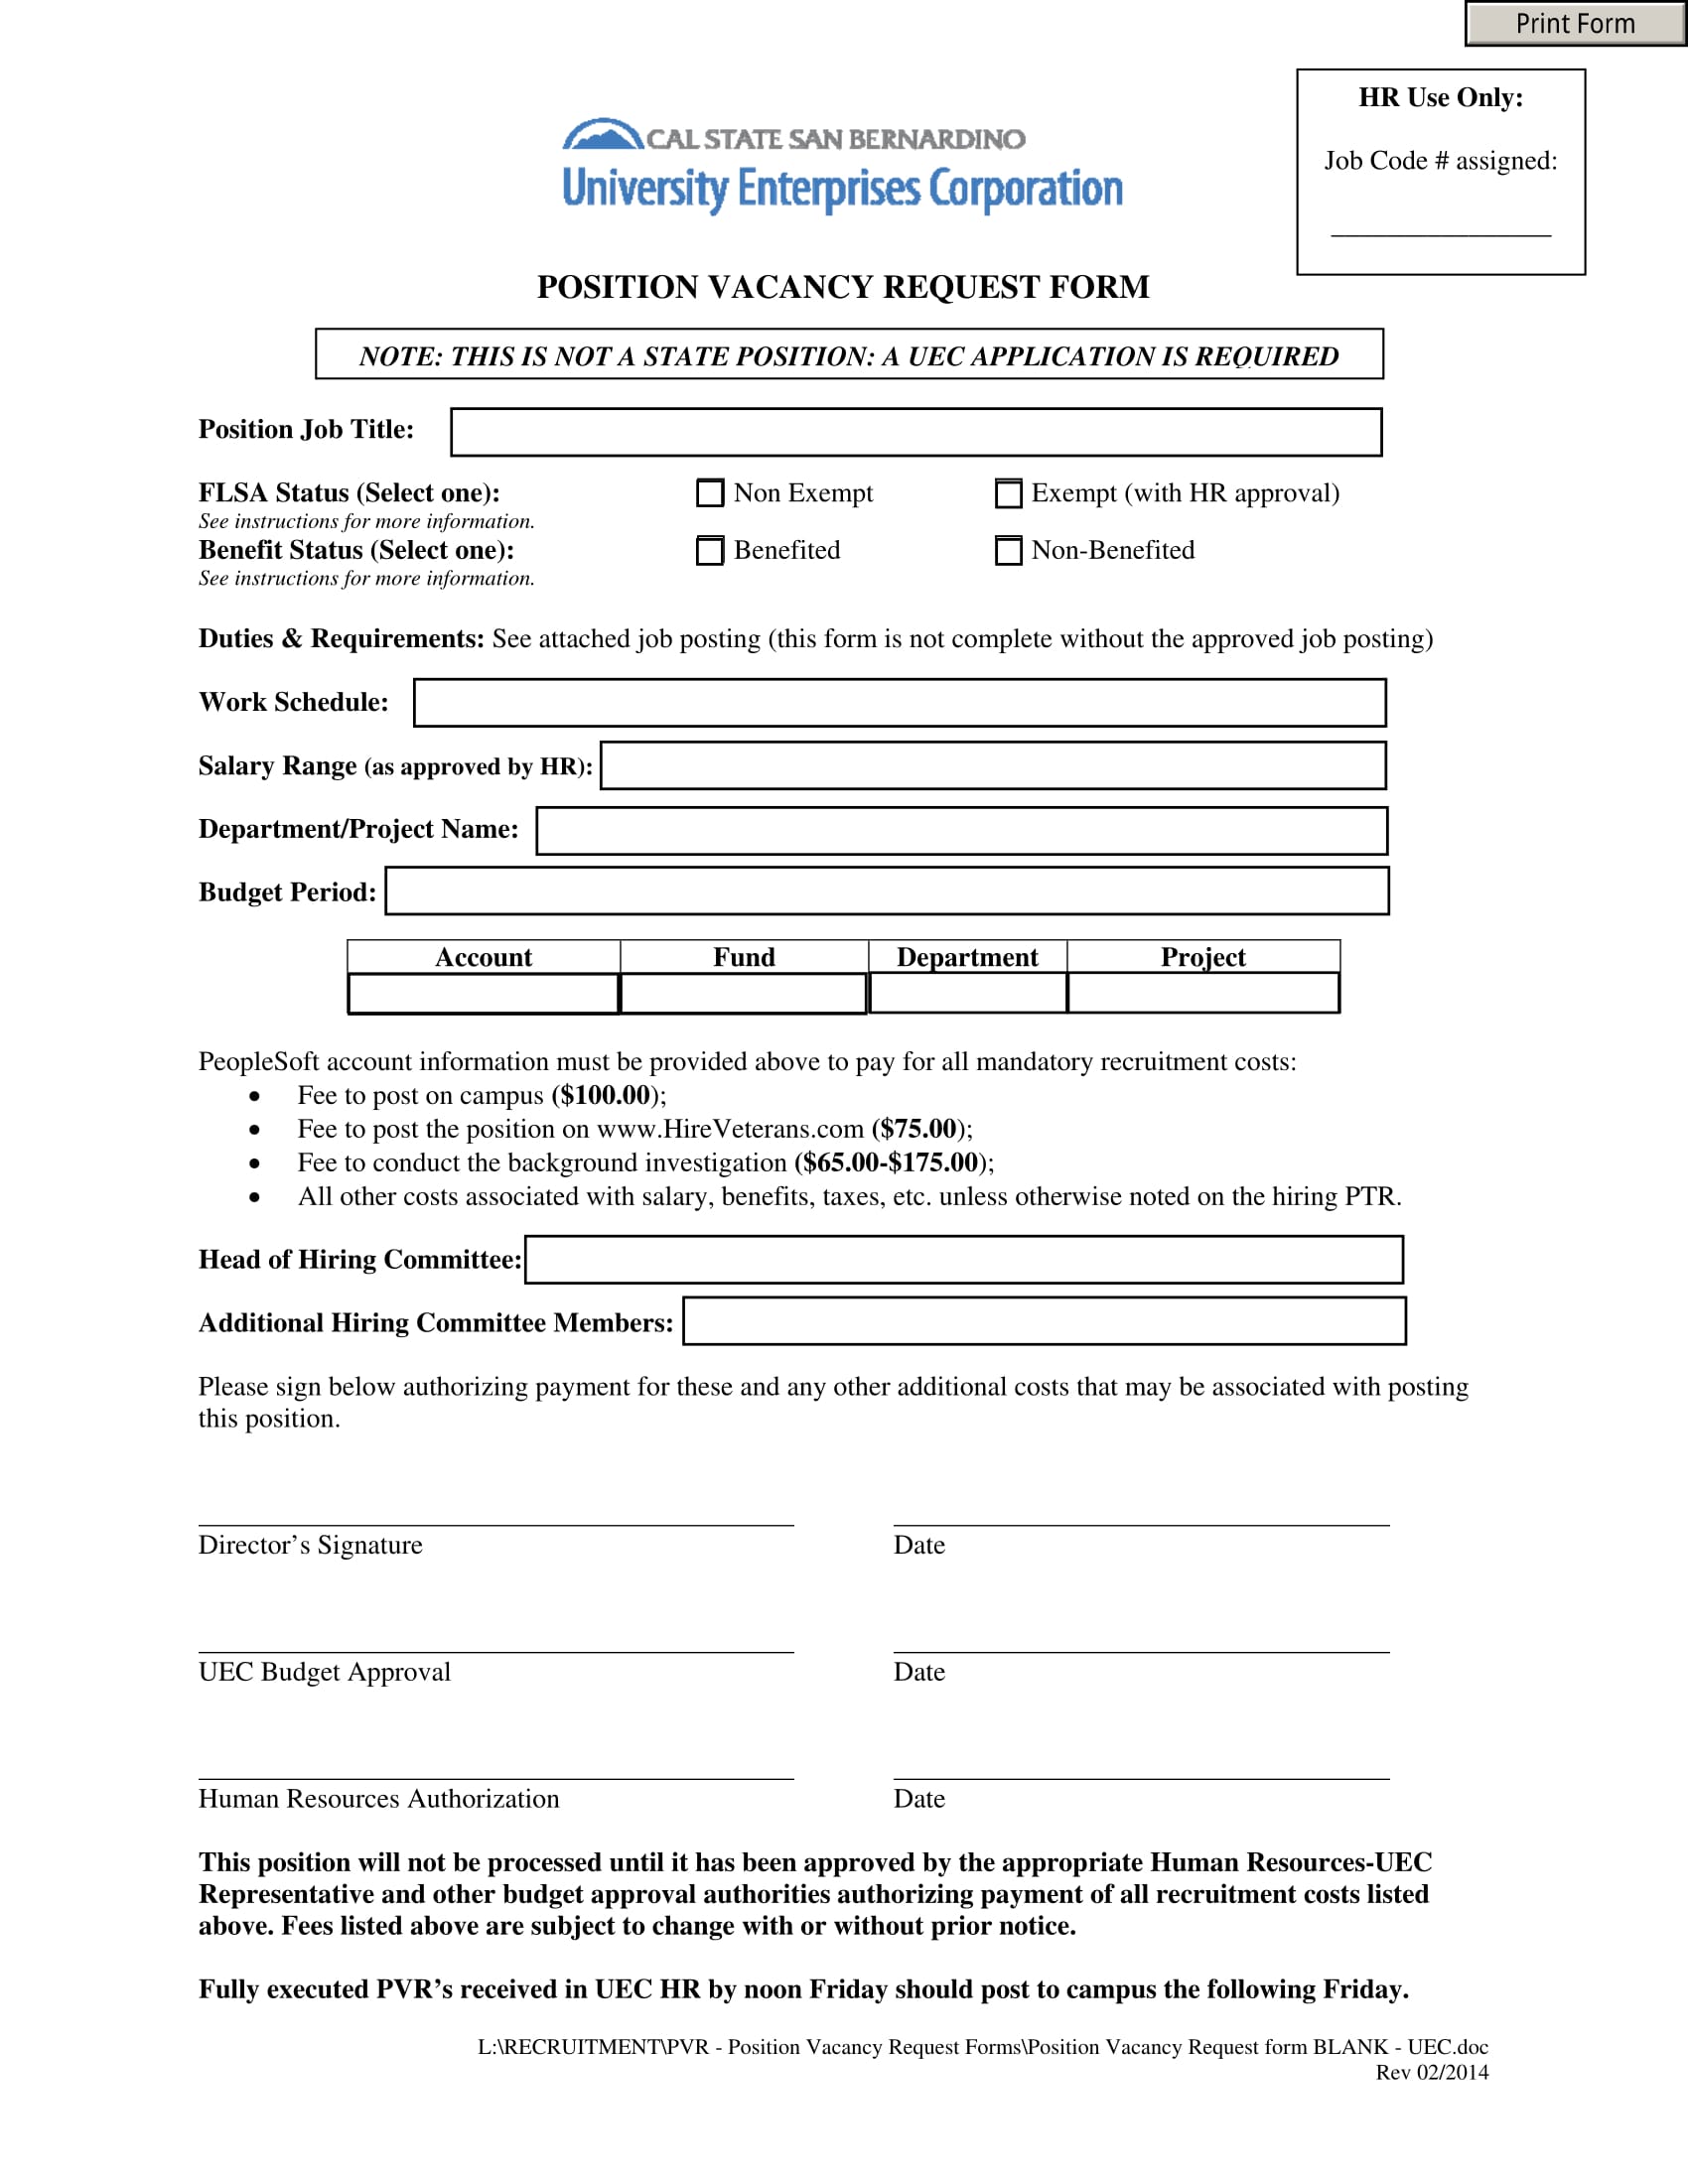 Position Request Form Template from images.sampleforms.com